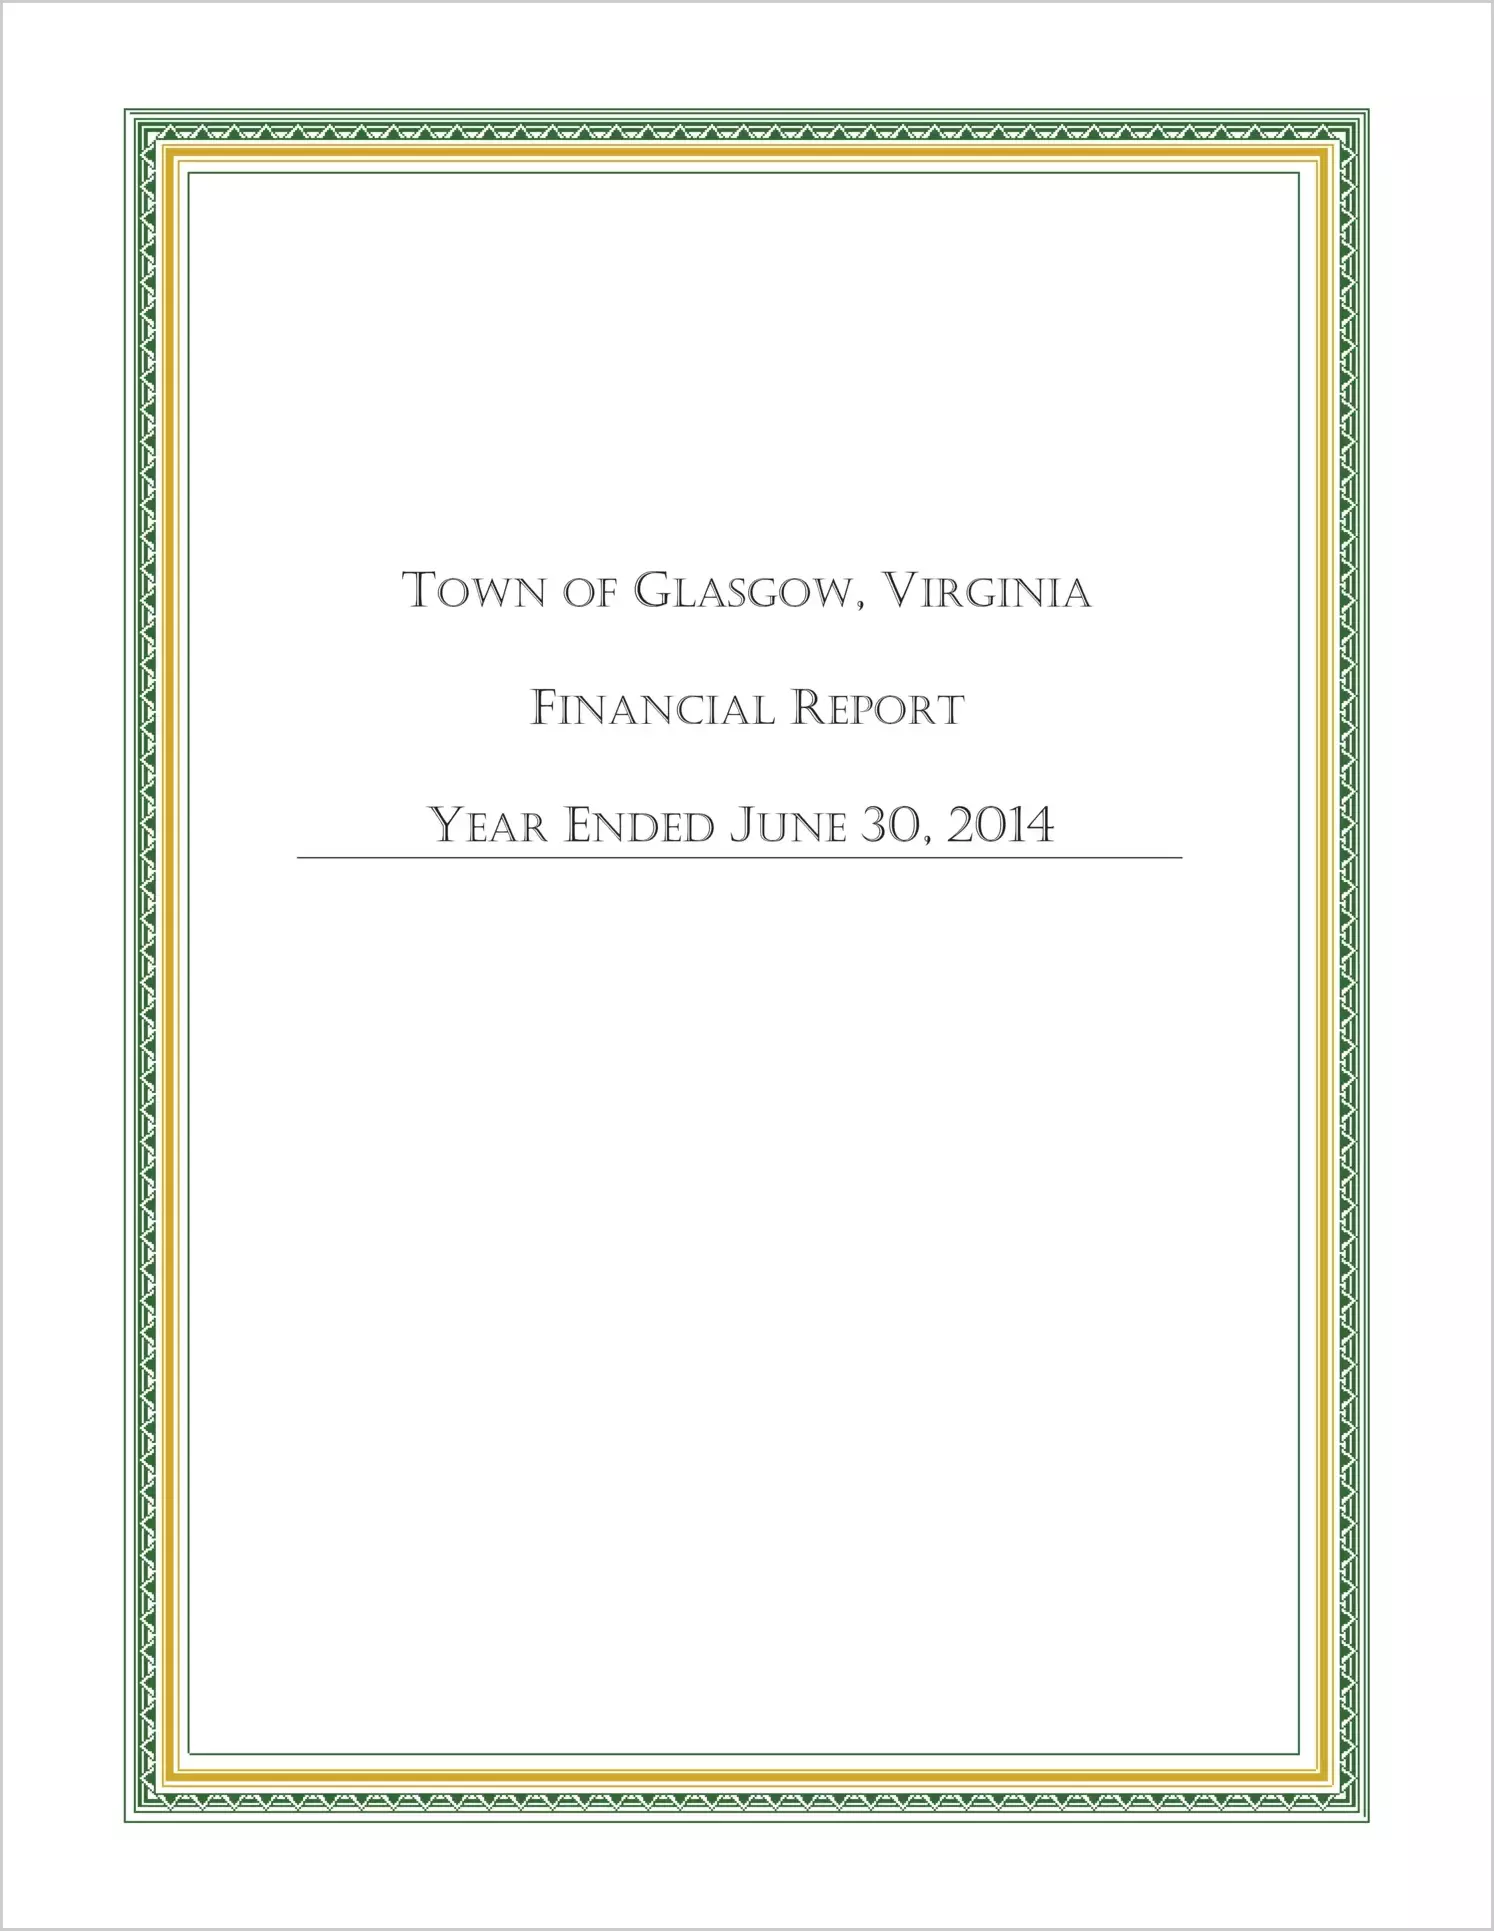 2014 Annual Financial Report for Town of Glasgow